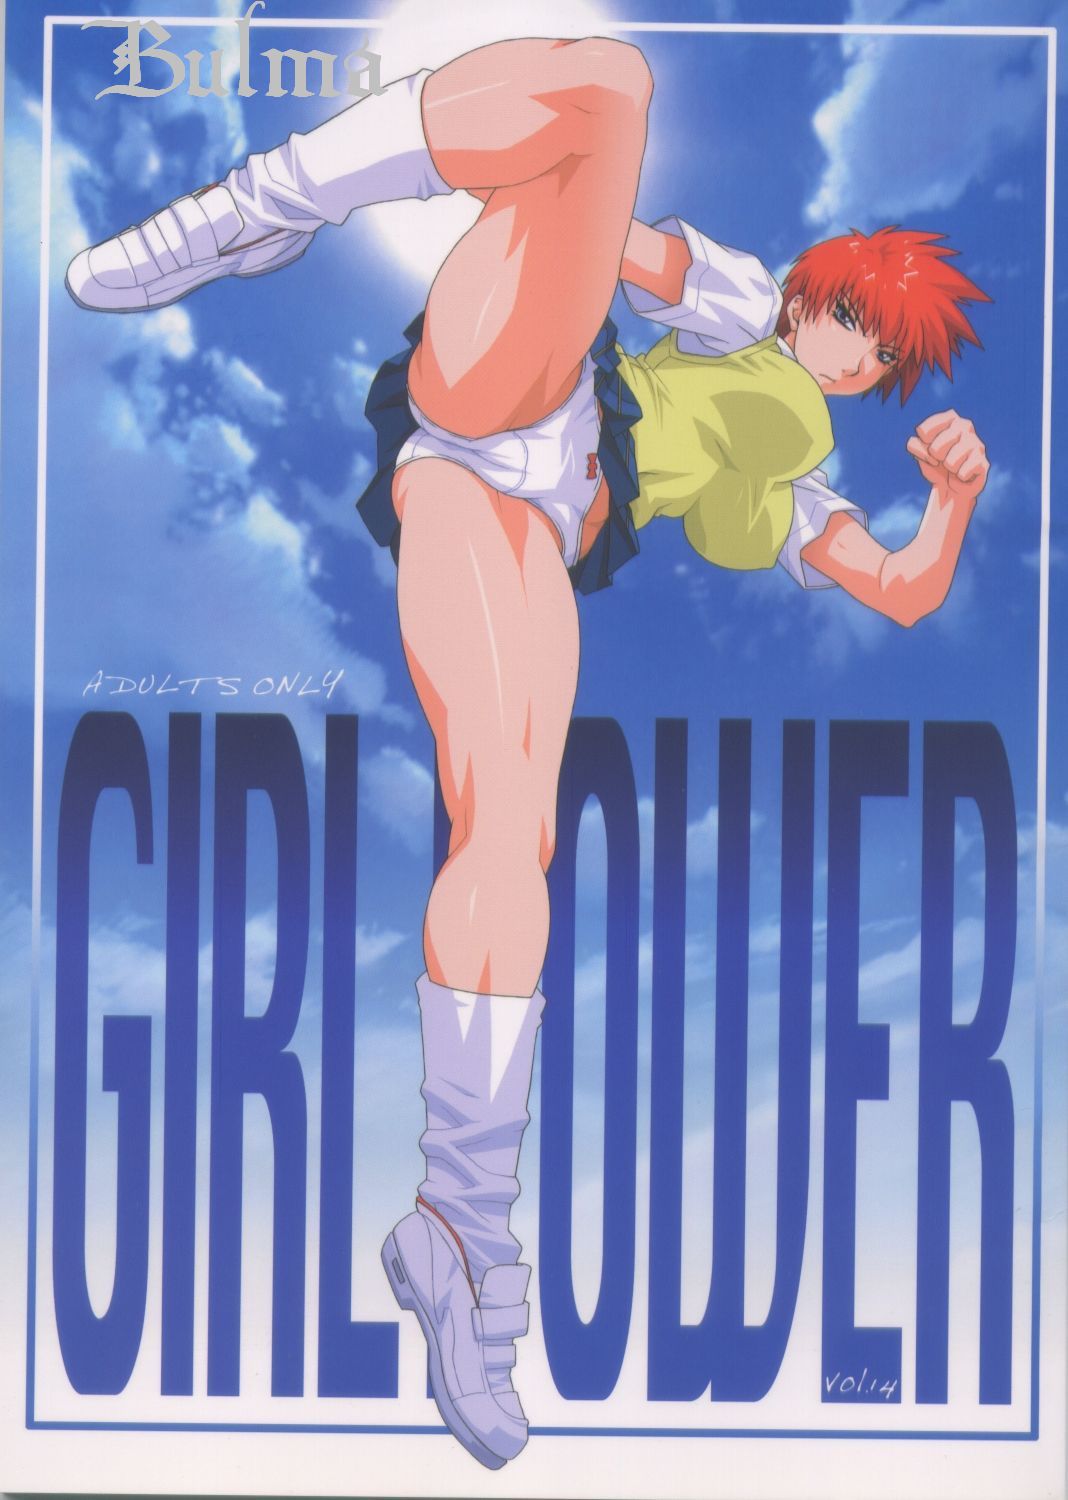 [Koutarou With T] GIRL POWER 14 (Air Master) [こうたろう With ティー] GIRL POWER Vol.14 (エアマスター)